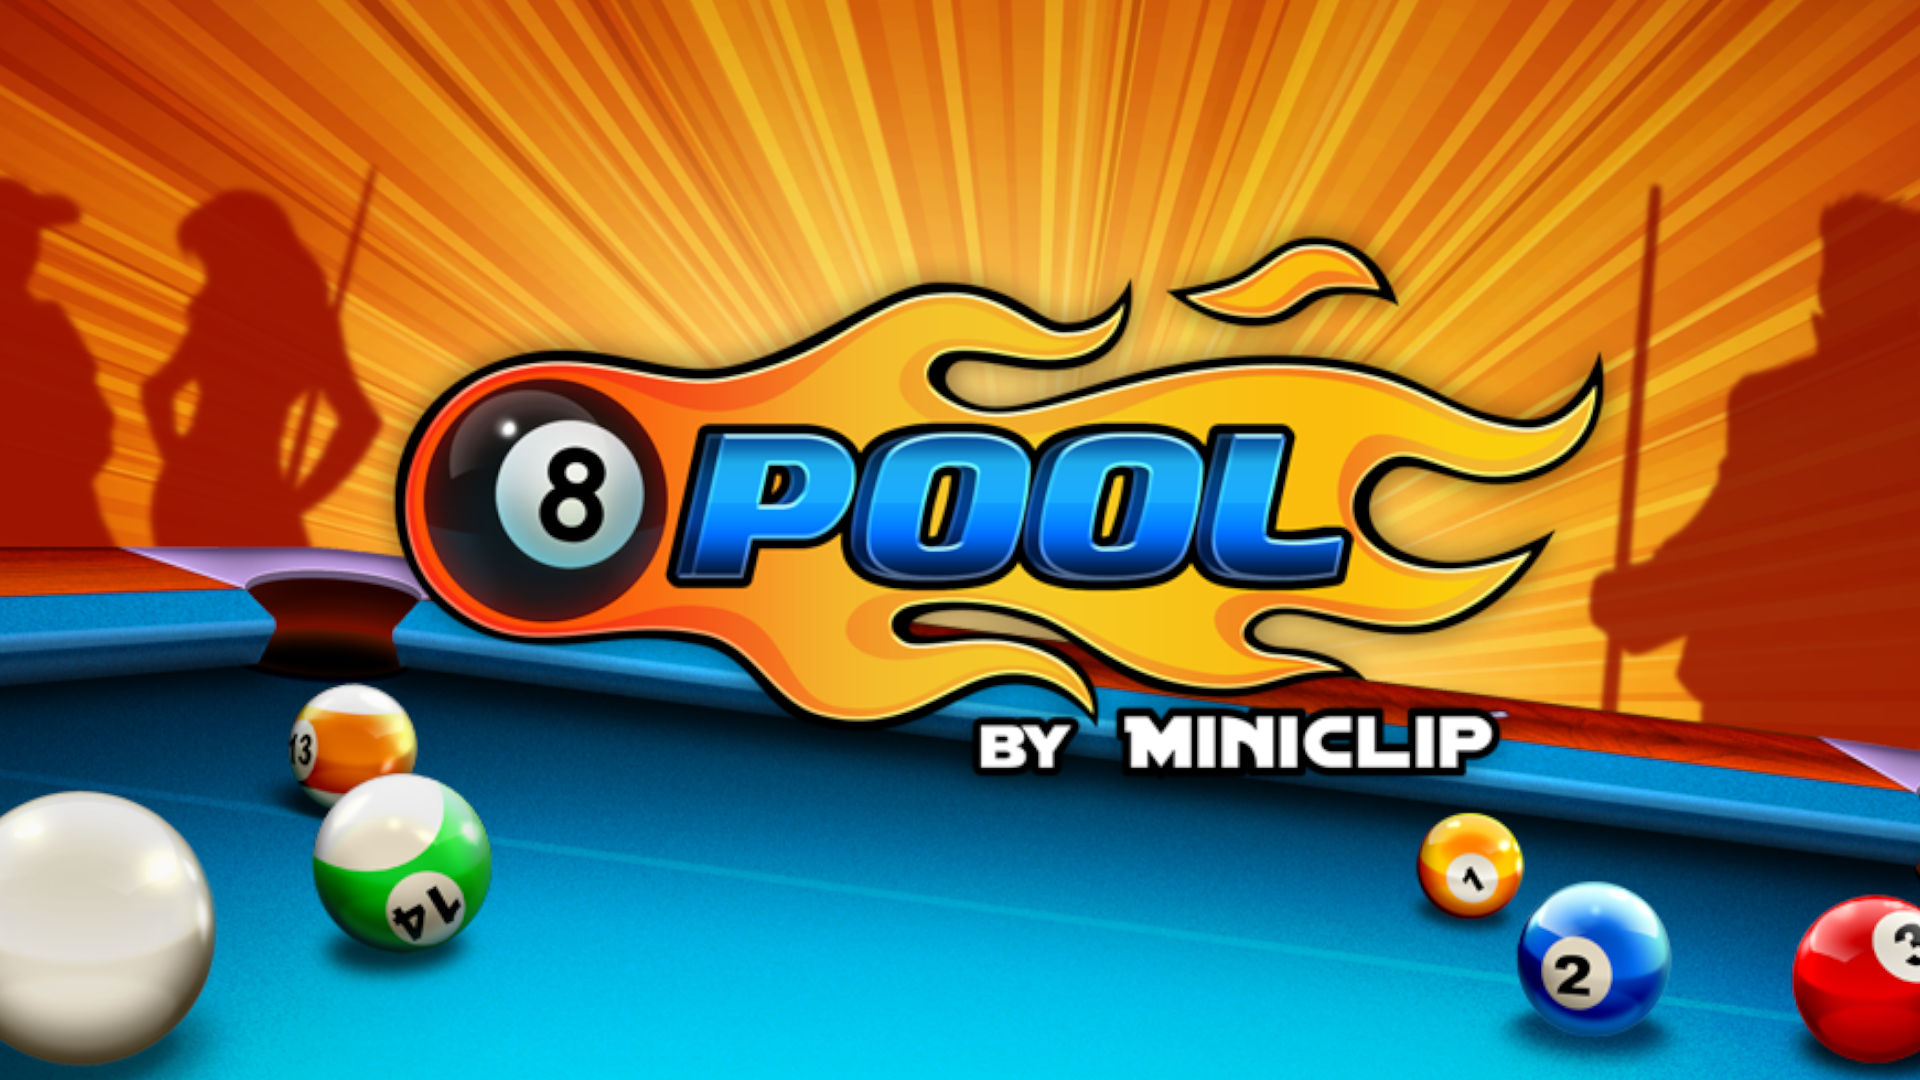 Key art for 8 Ball Pool, one of the most popular online pool games